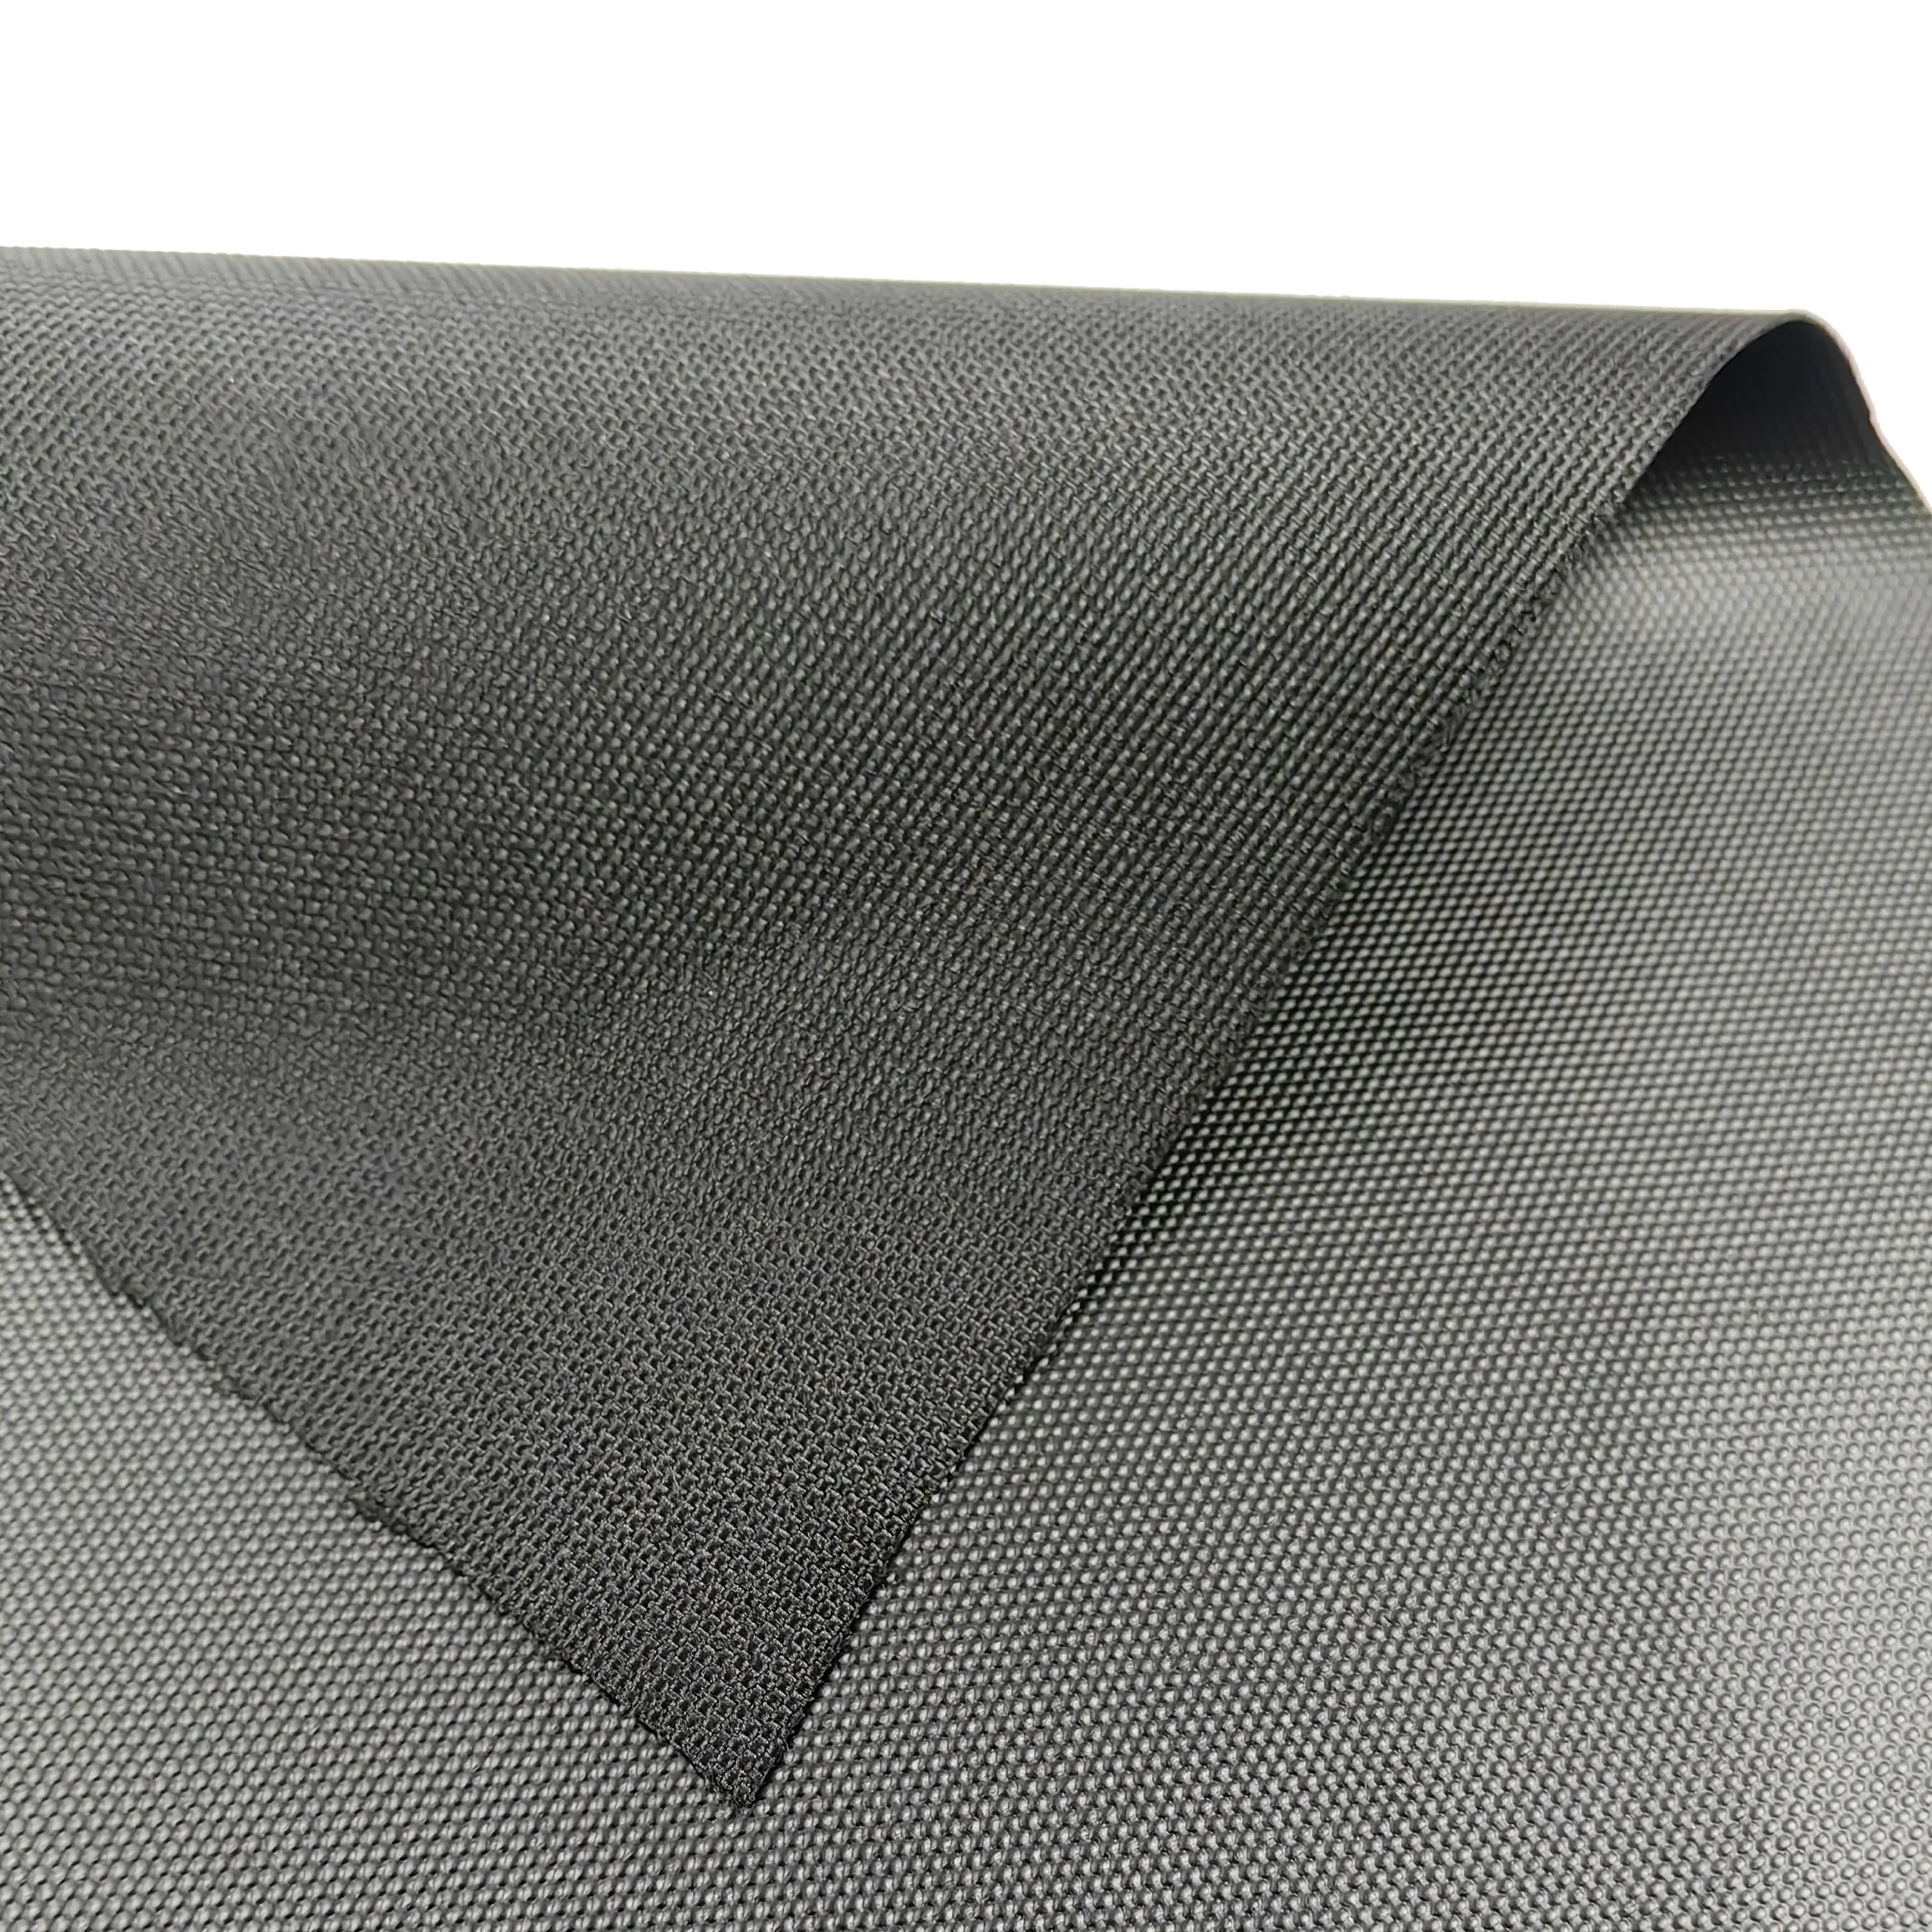 Fabric PU Membrane Laminated 900D Polyester Oxford Fabric Waterproof Anti-scratch For Bags Luggage Outdoor Tent Jackets Clothes